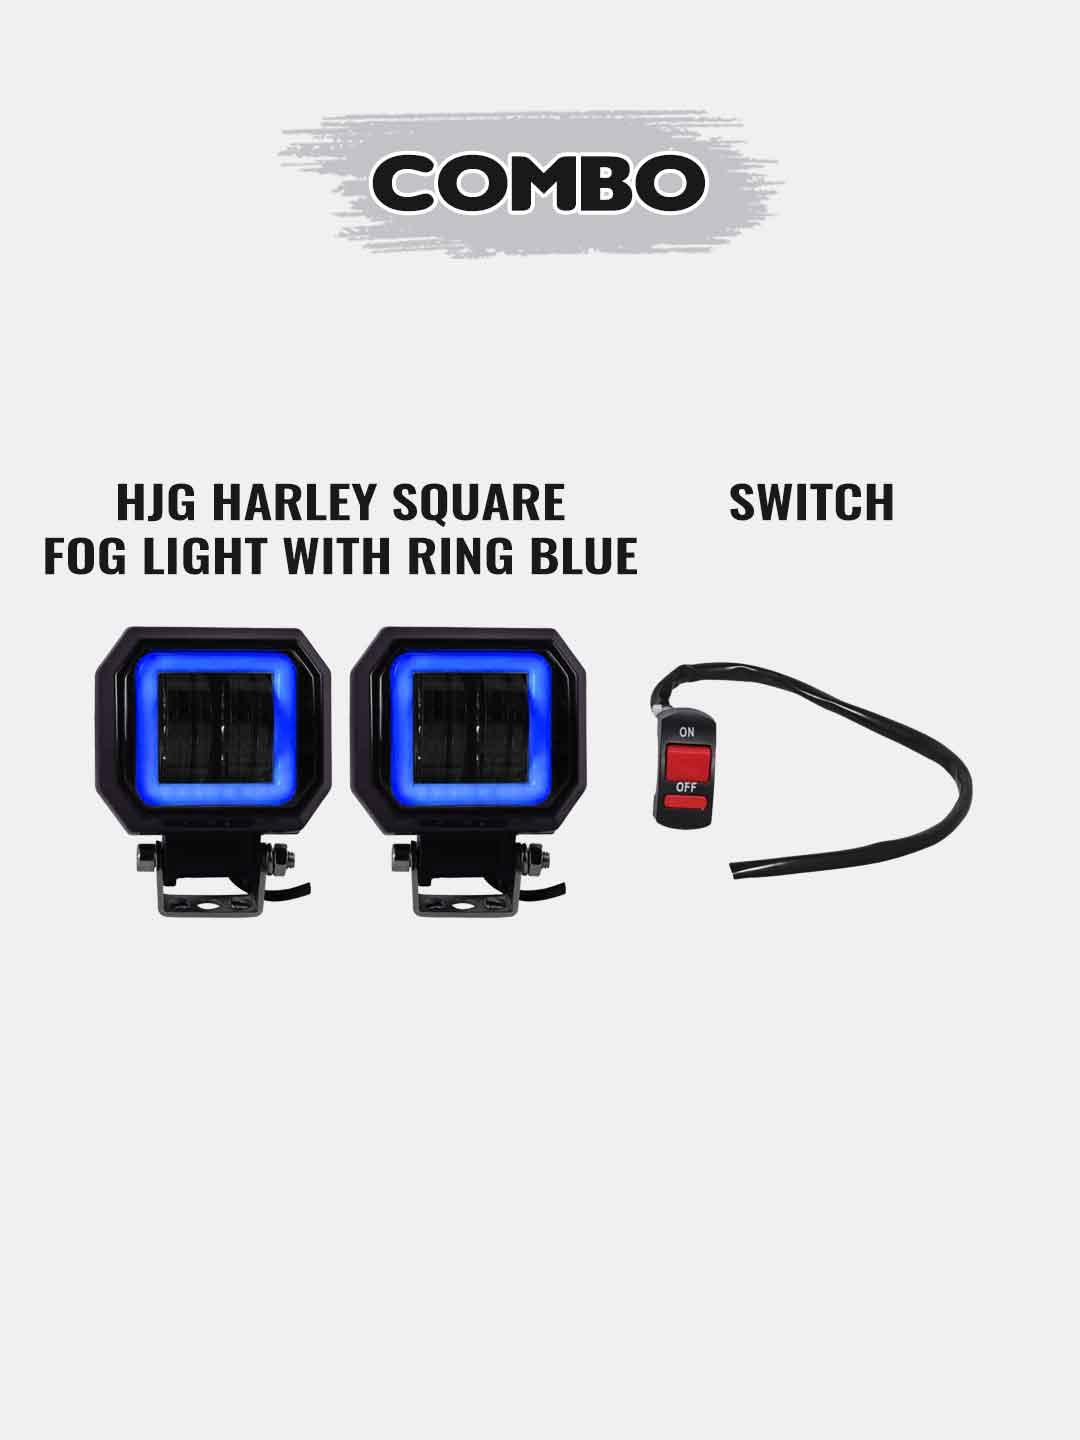 1 Pair HJG Harley Square Fog Light With Ring DRL + Auxiliary Switch - Moto Modz